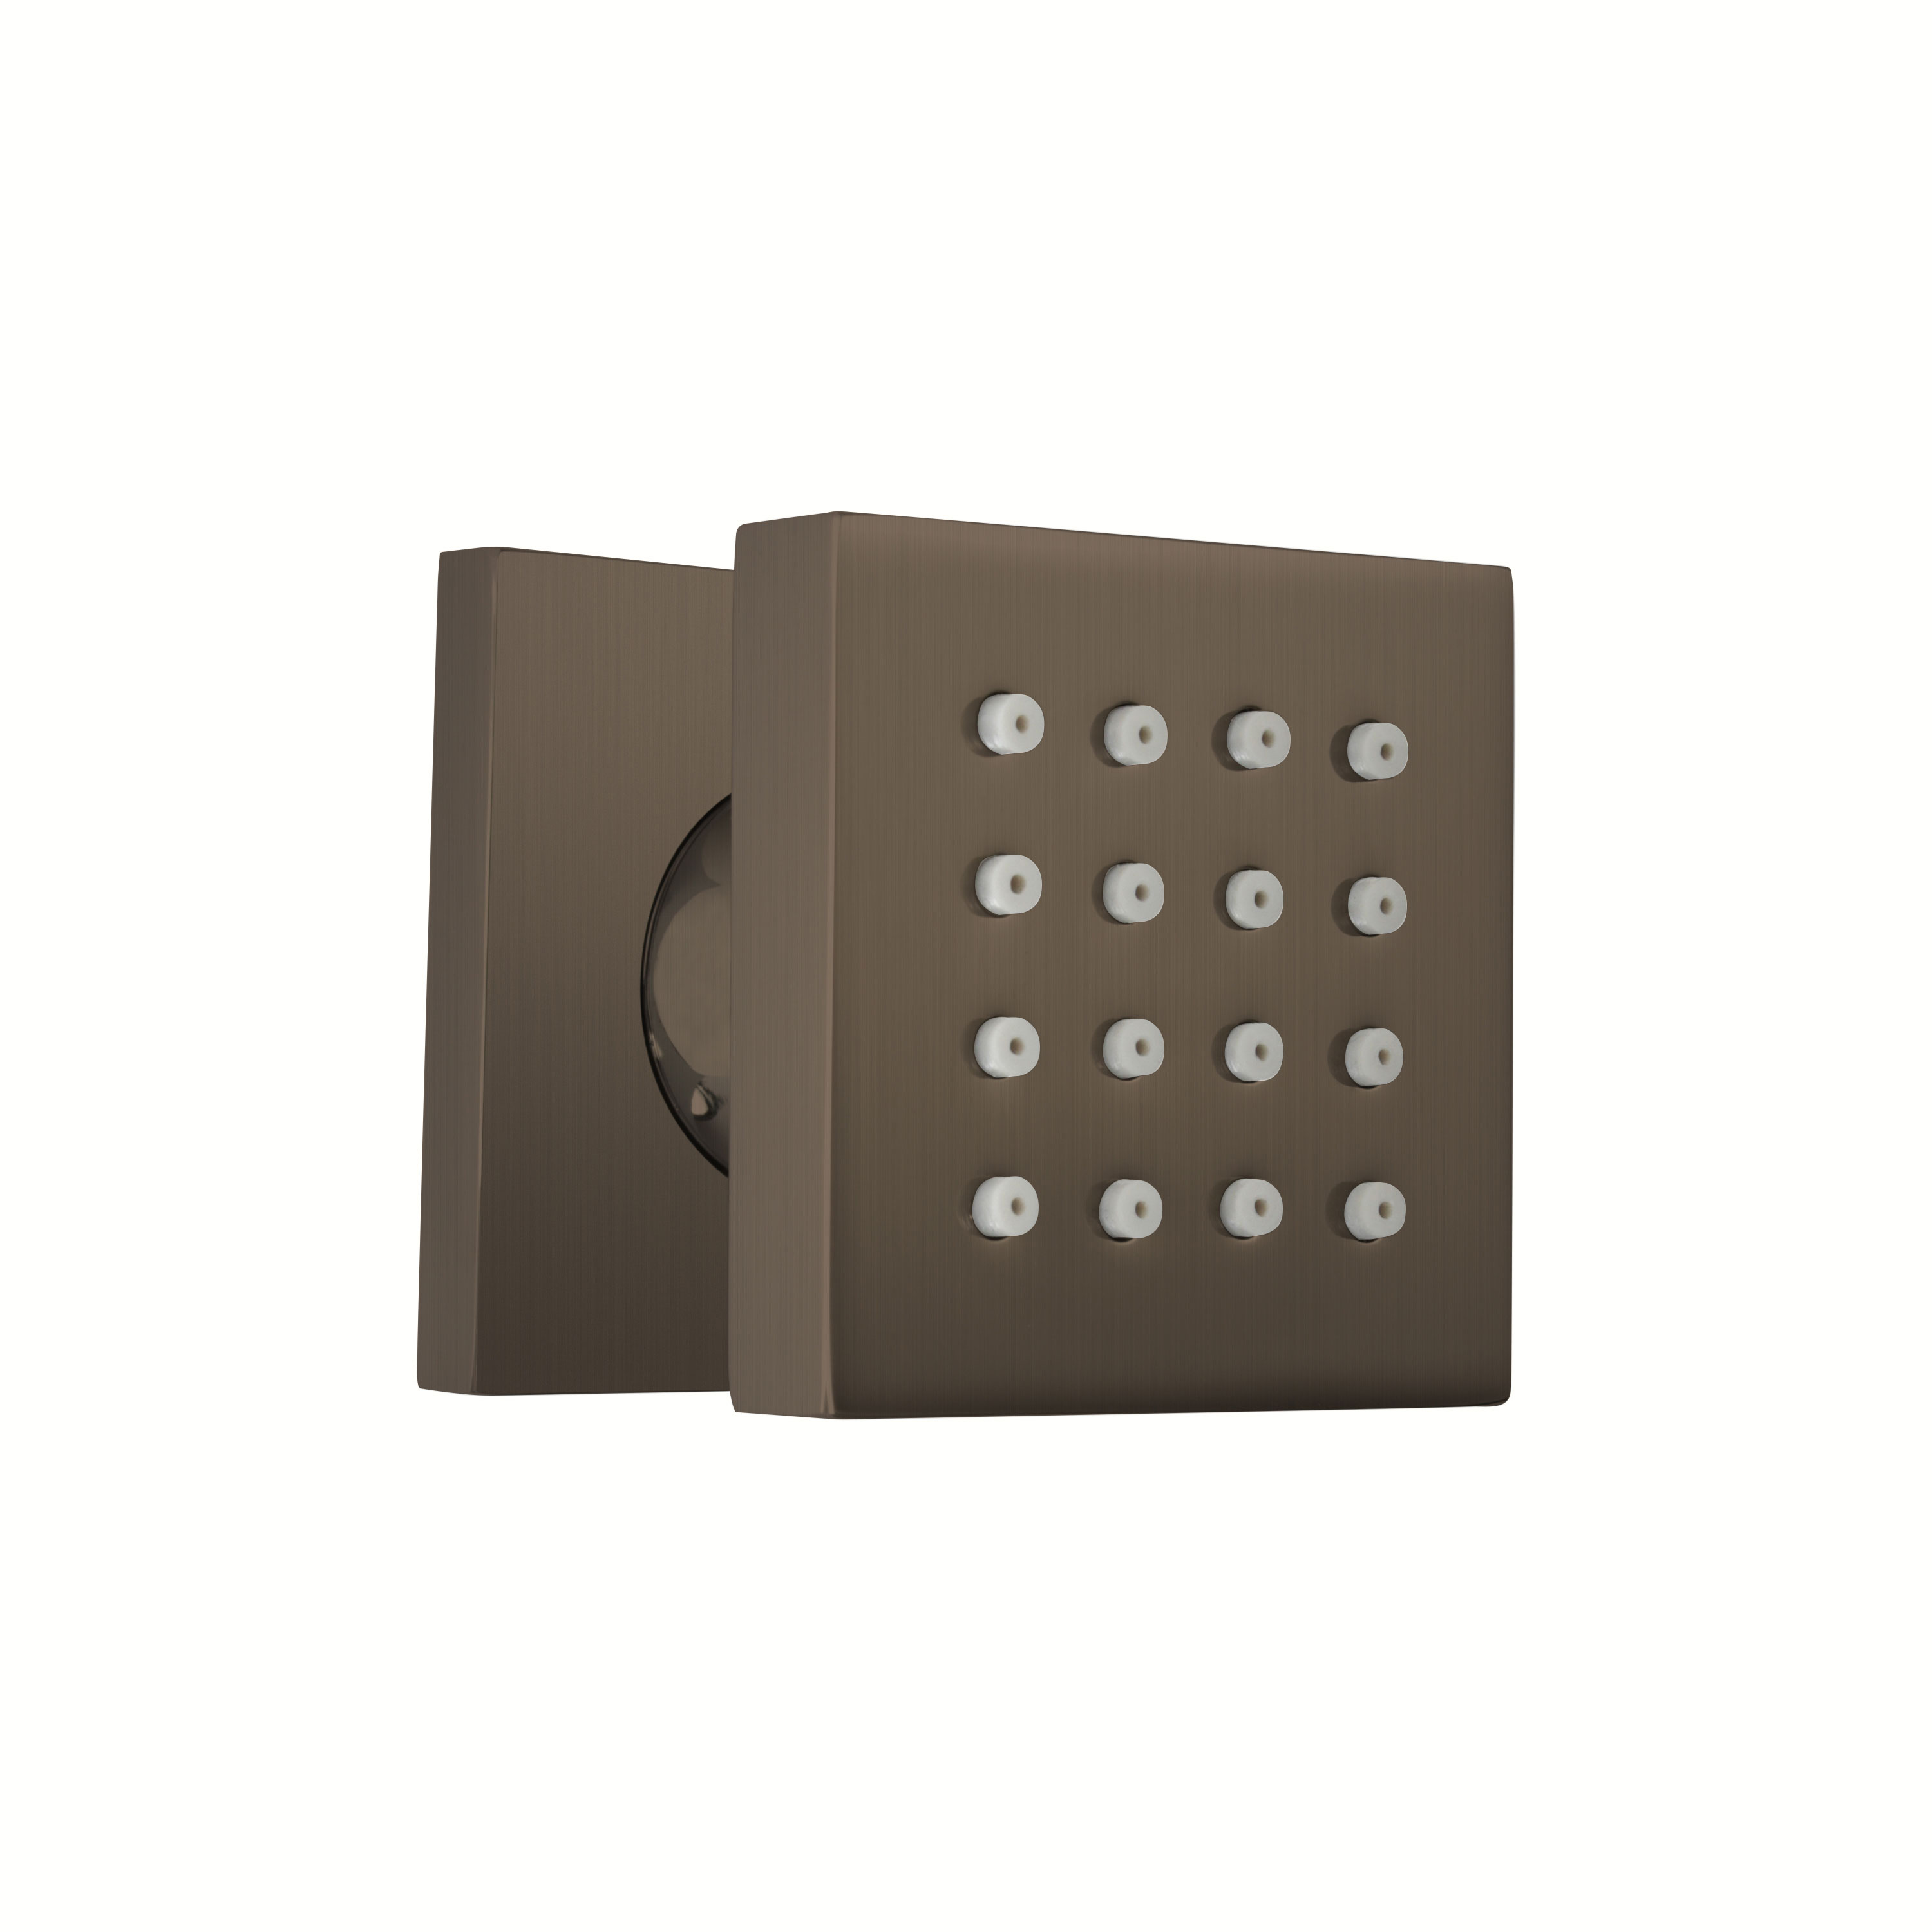 Thermasol 15-1010-ORB 50mm x 50mm x 10mm, Body Spray Square - Oil Rubbed Bronze